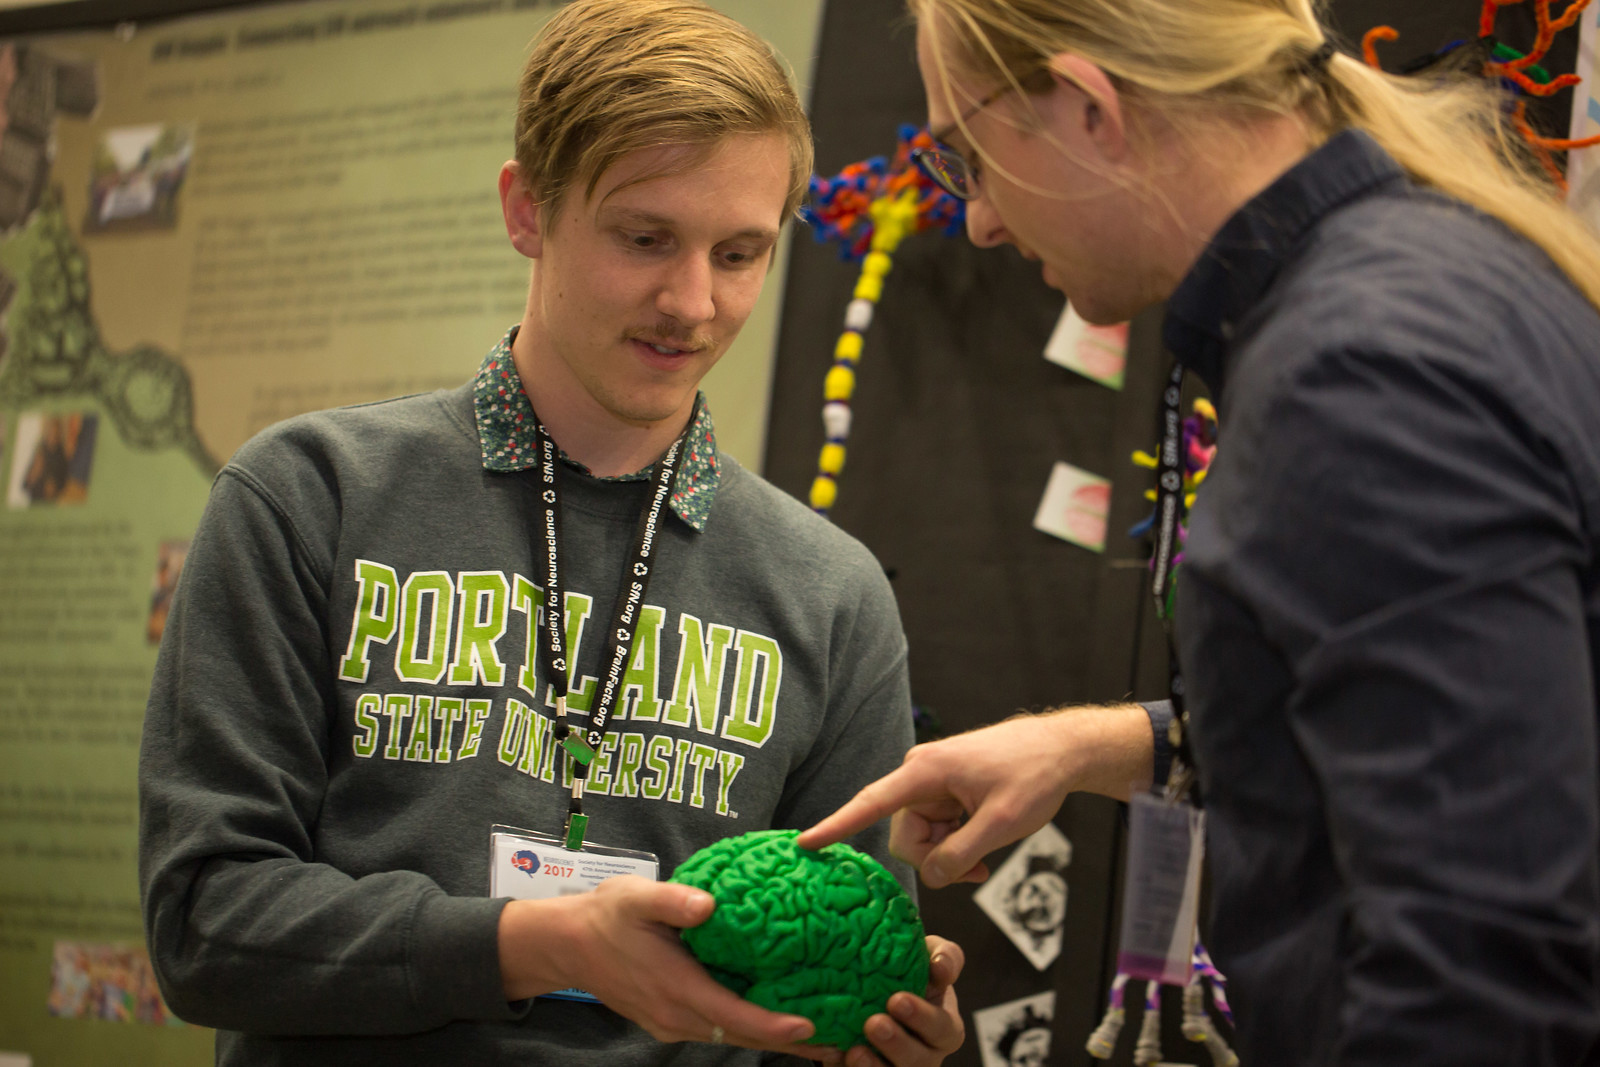 a person holding out a scientific brain model as another person touches the model